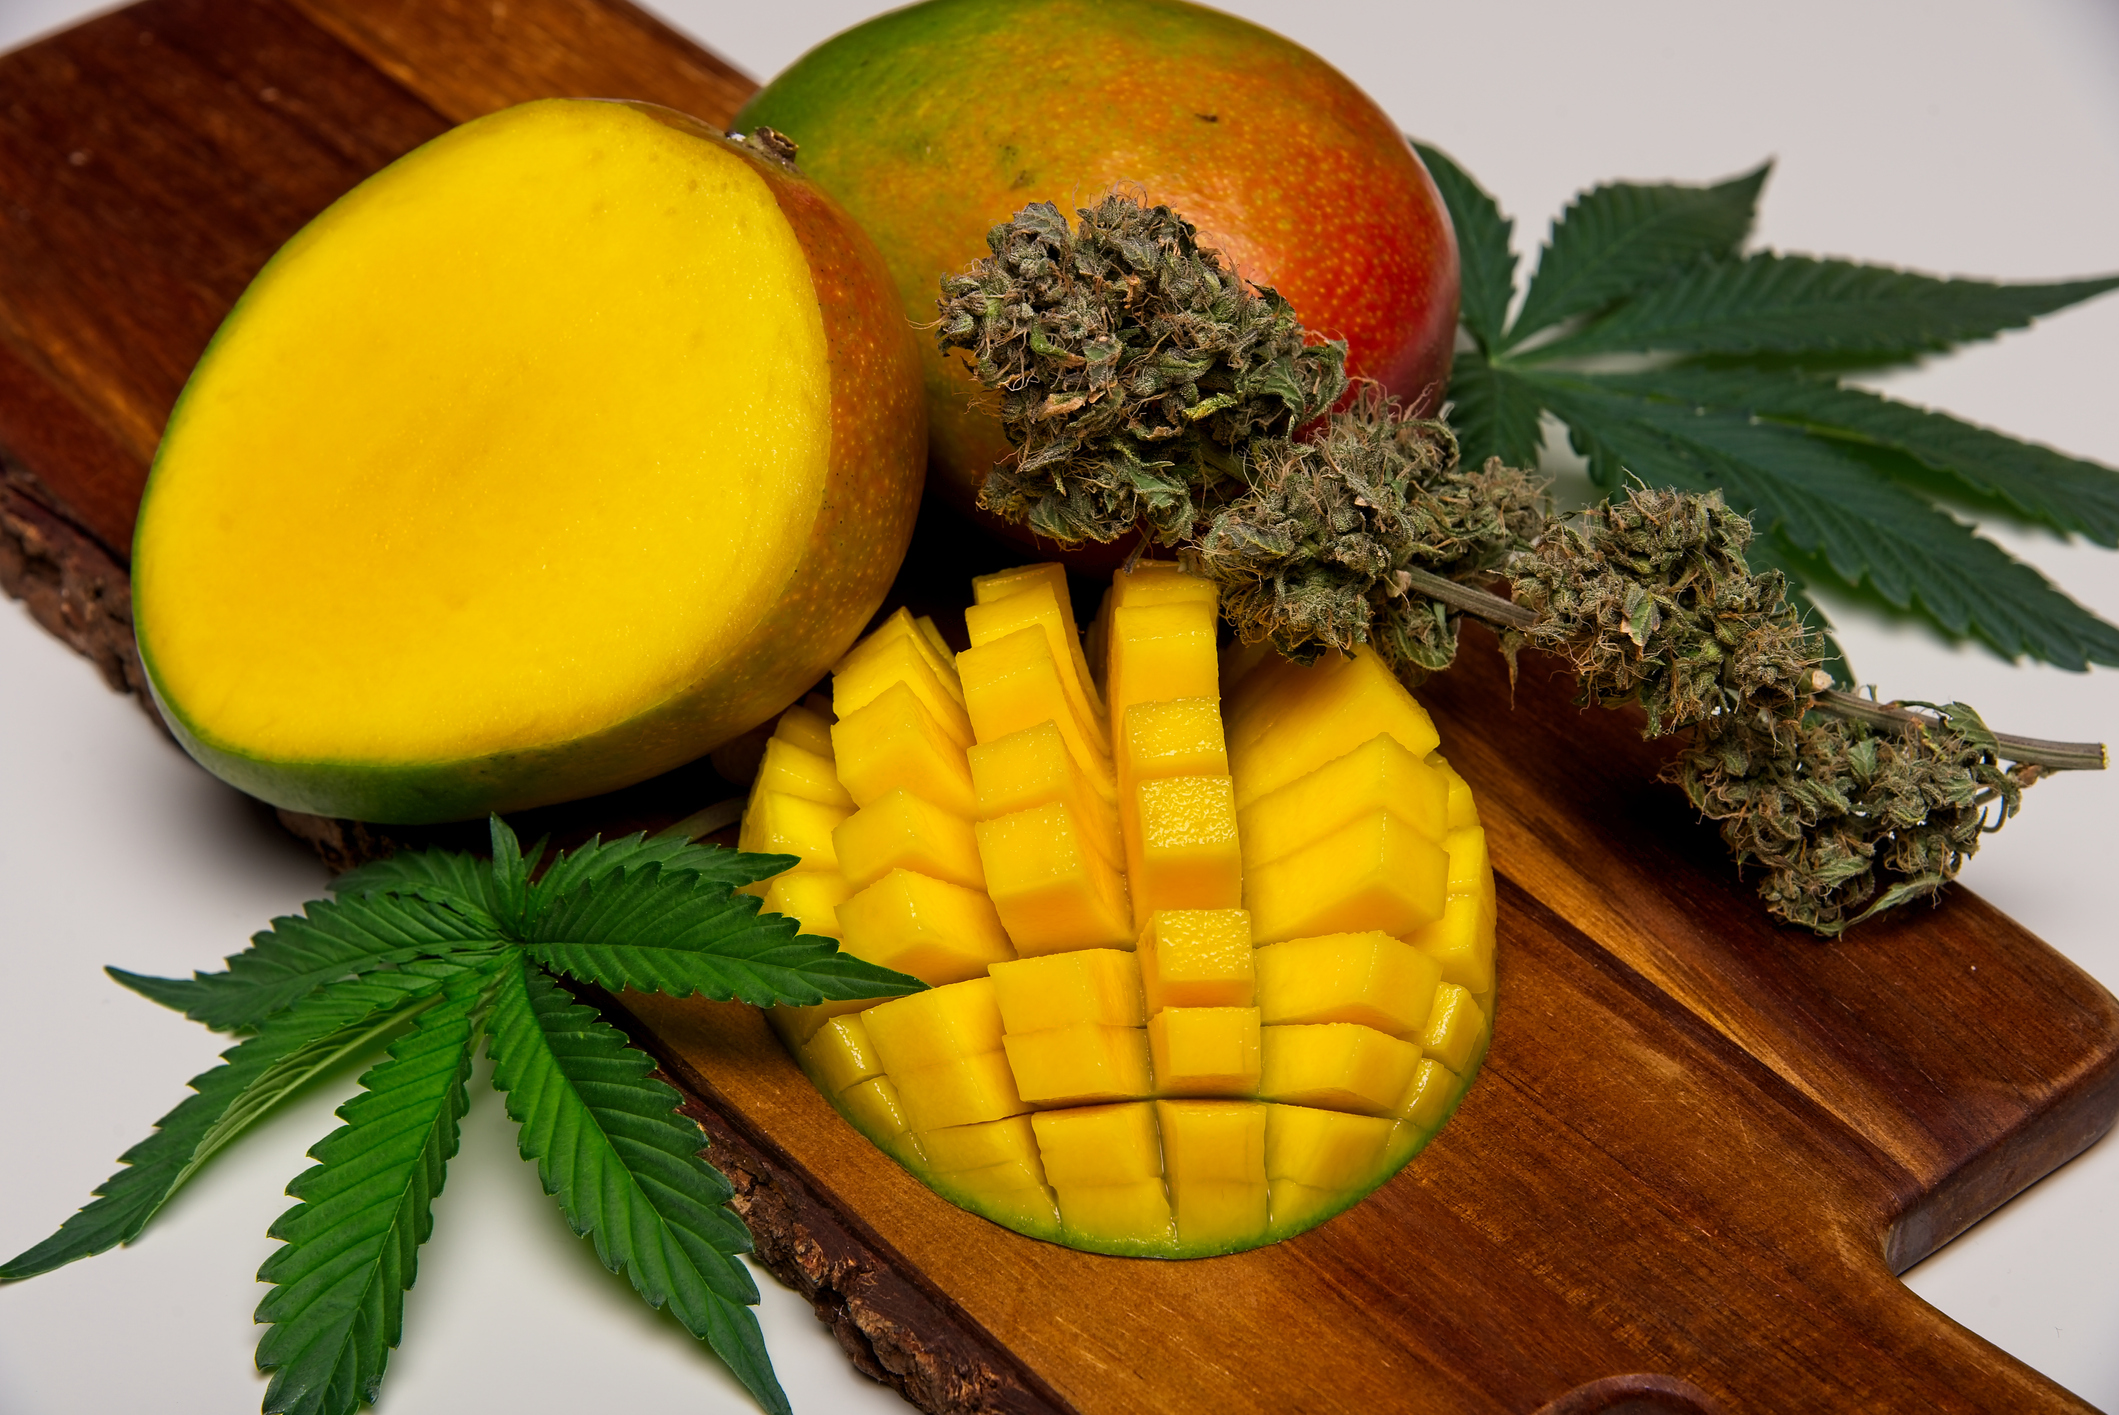 Does Mangos get you higher